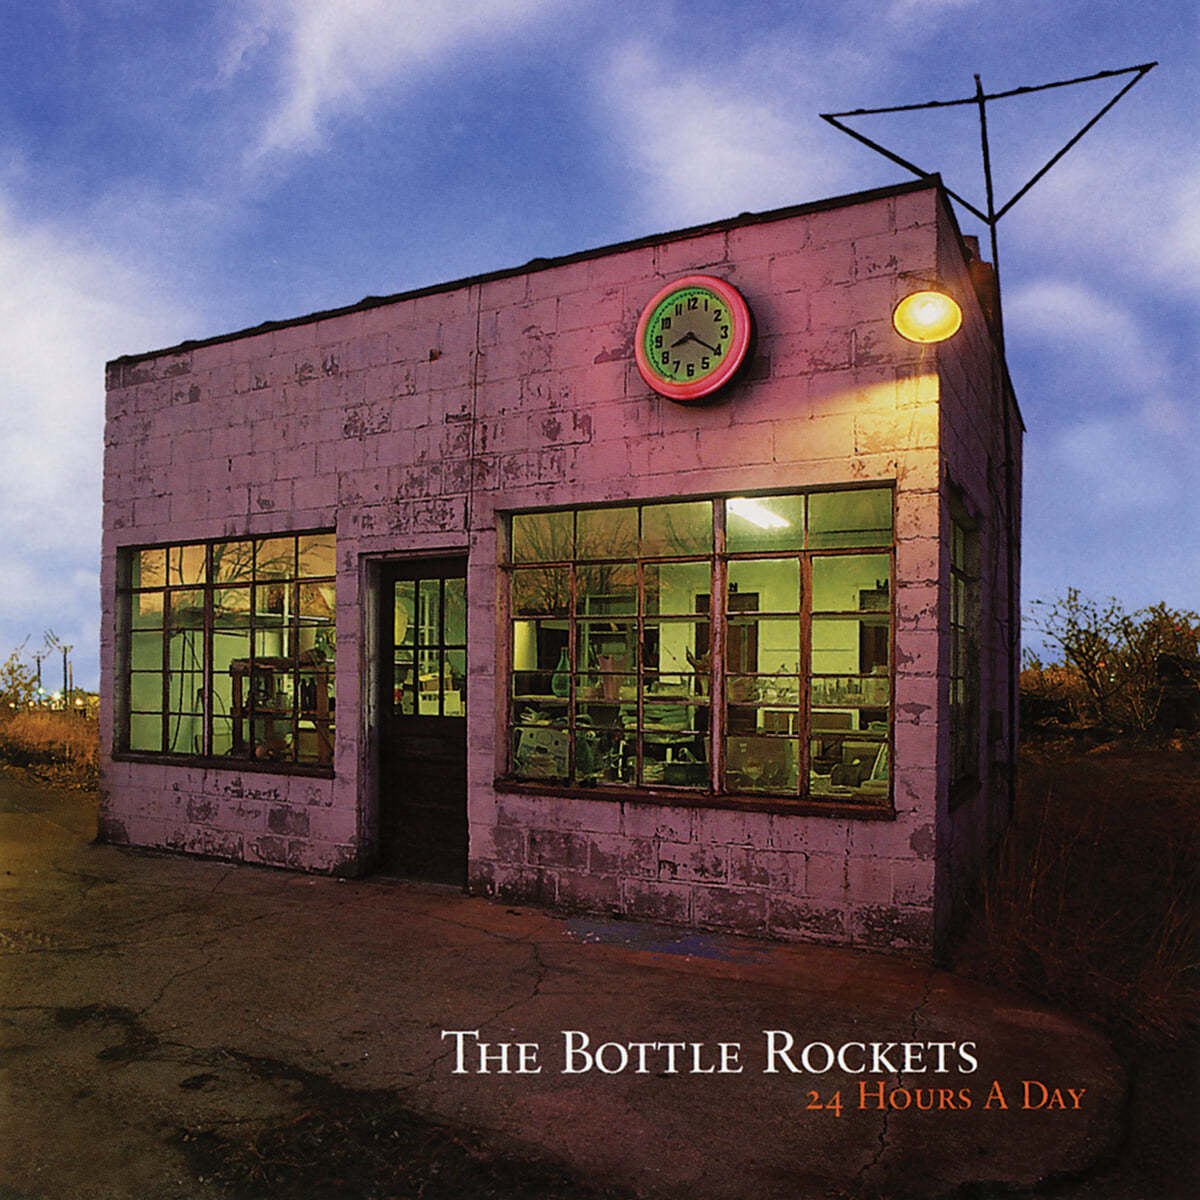 The Bottle Rockets (더 보틀 로켓) - 24 Hours a Day [투명 코크 보틀 컬러 LP]